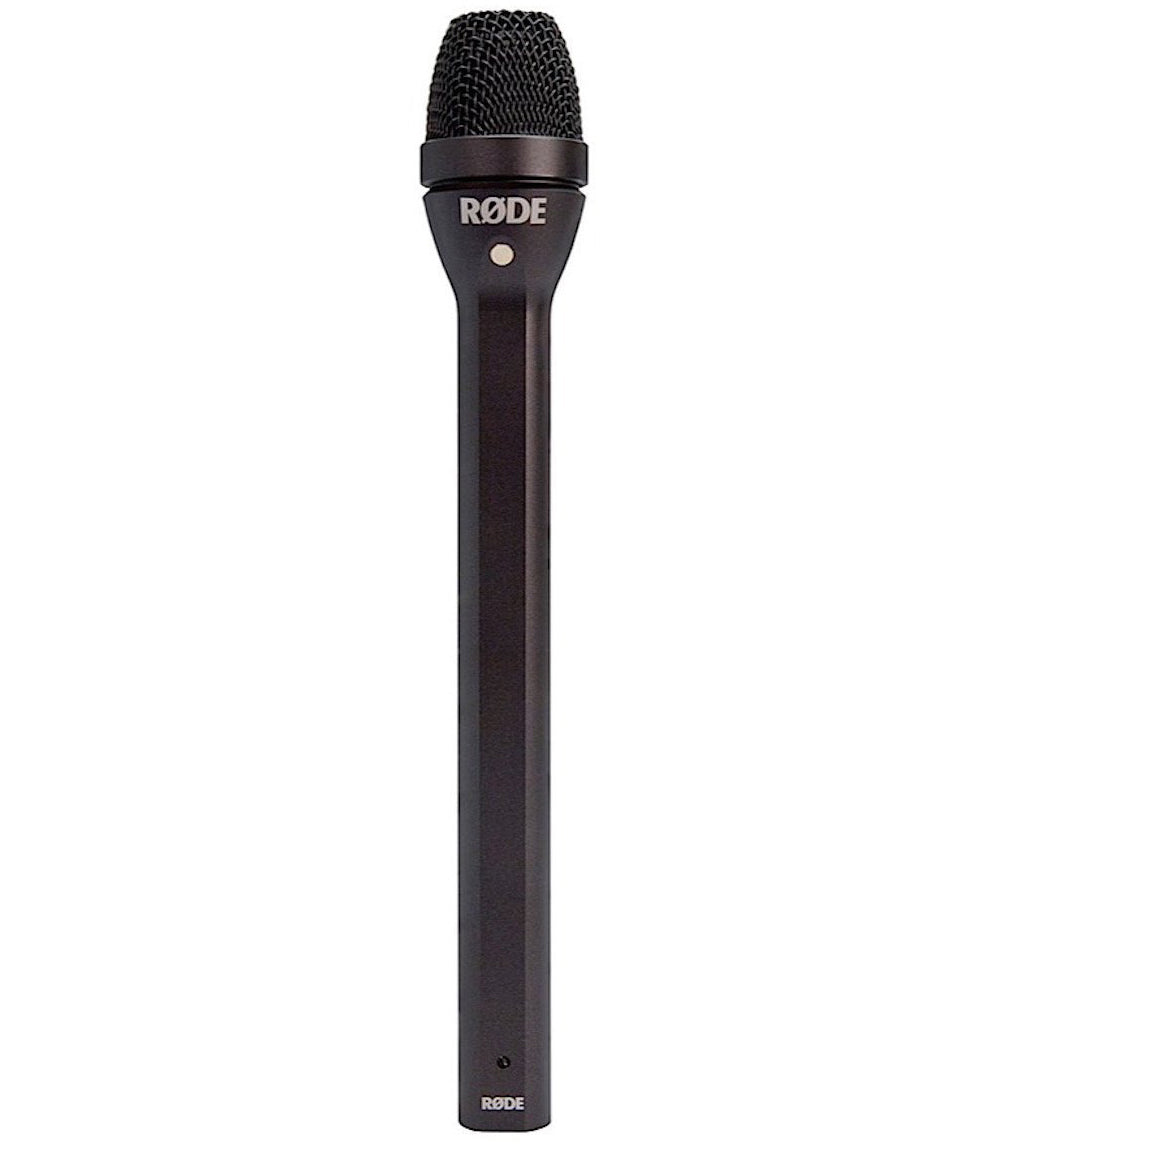 Rode REPORTER Omnidirectional Dynamic Interview Microphone